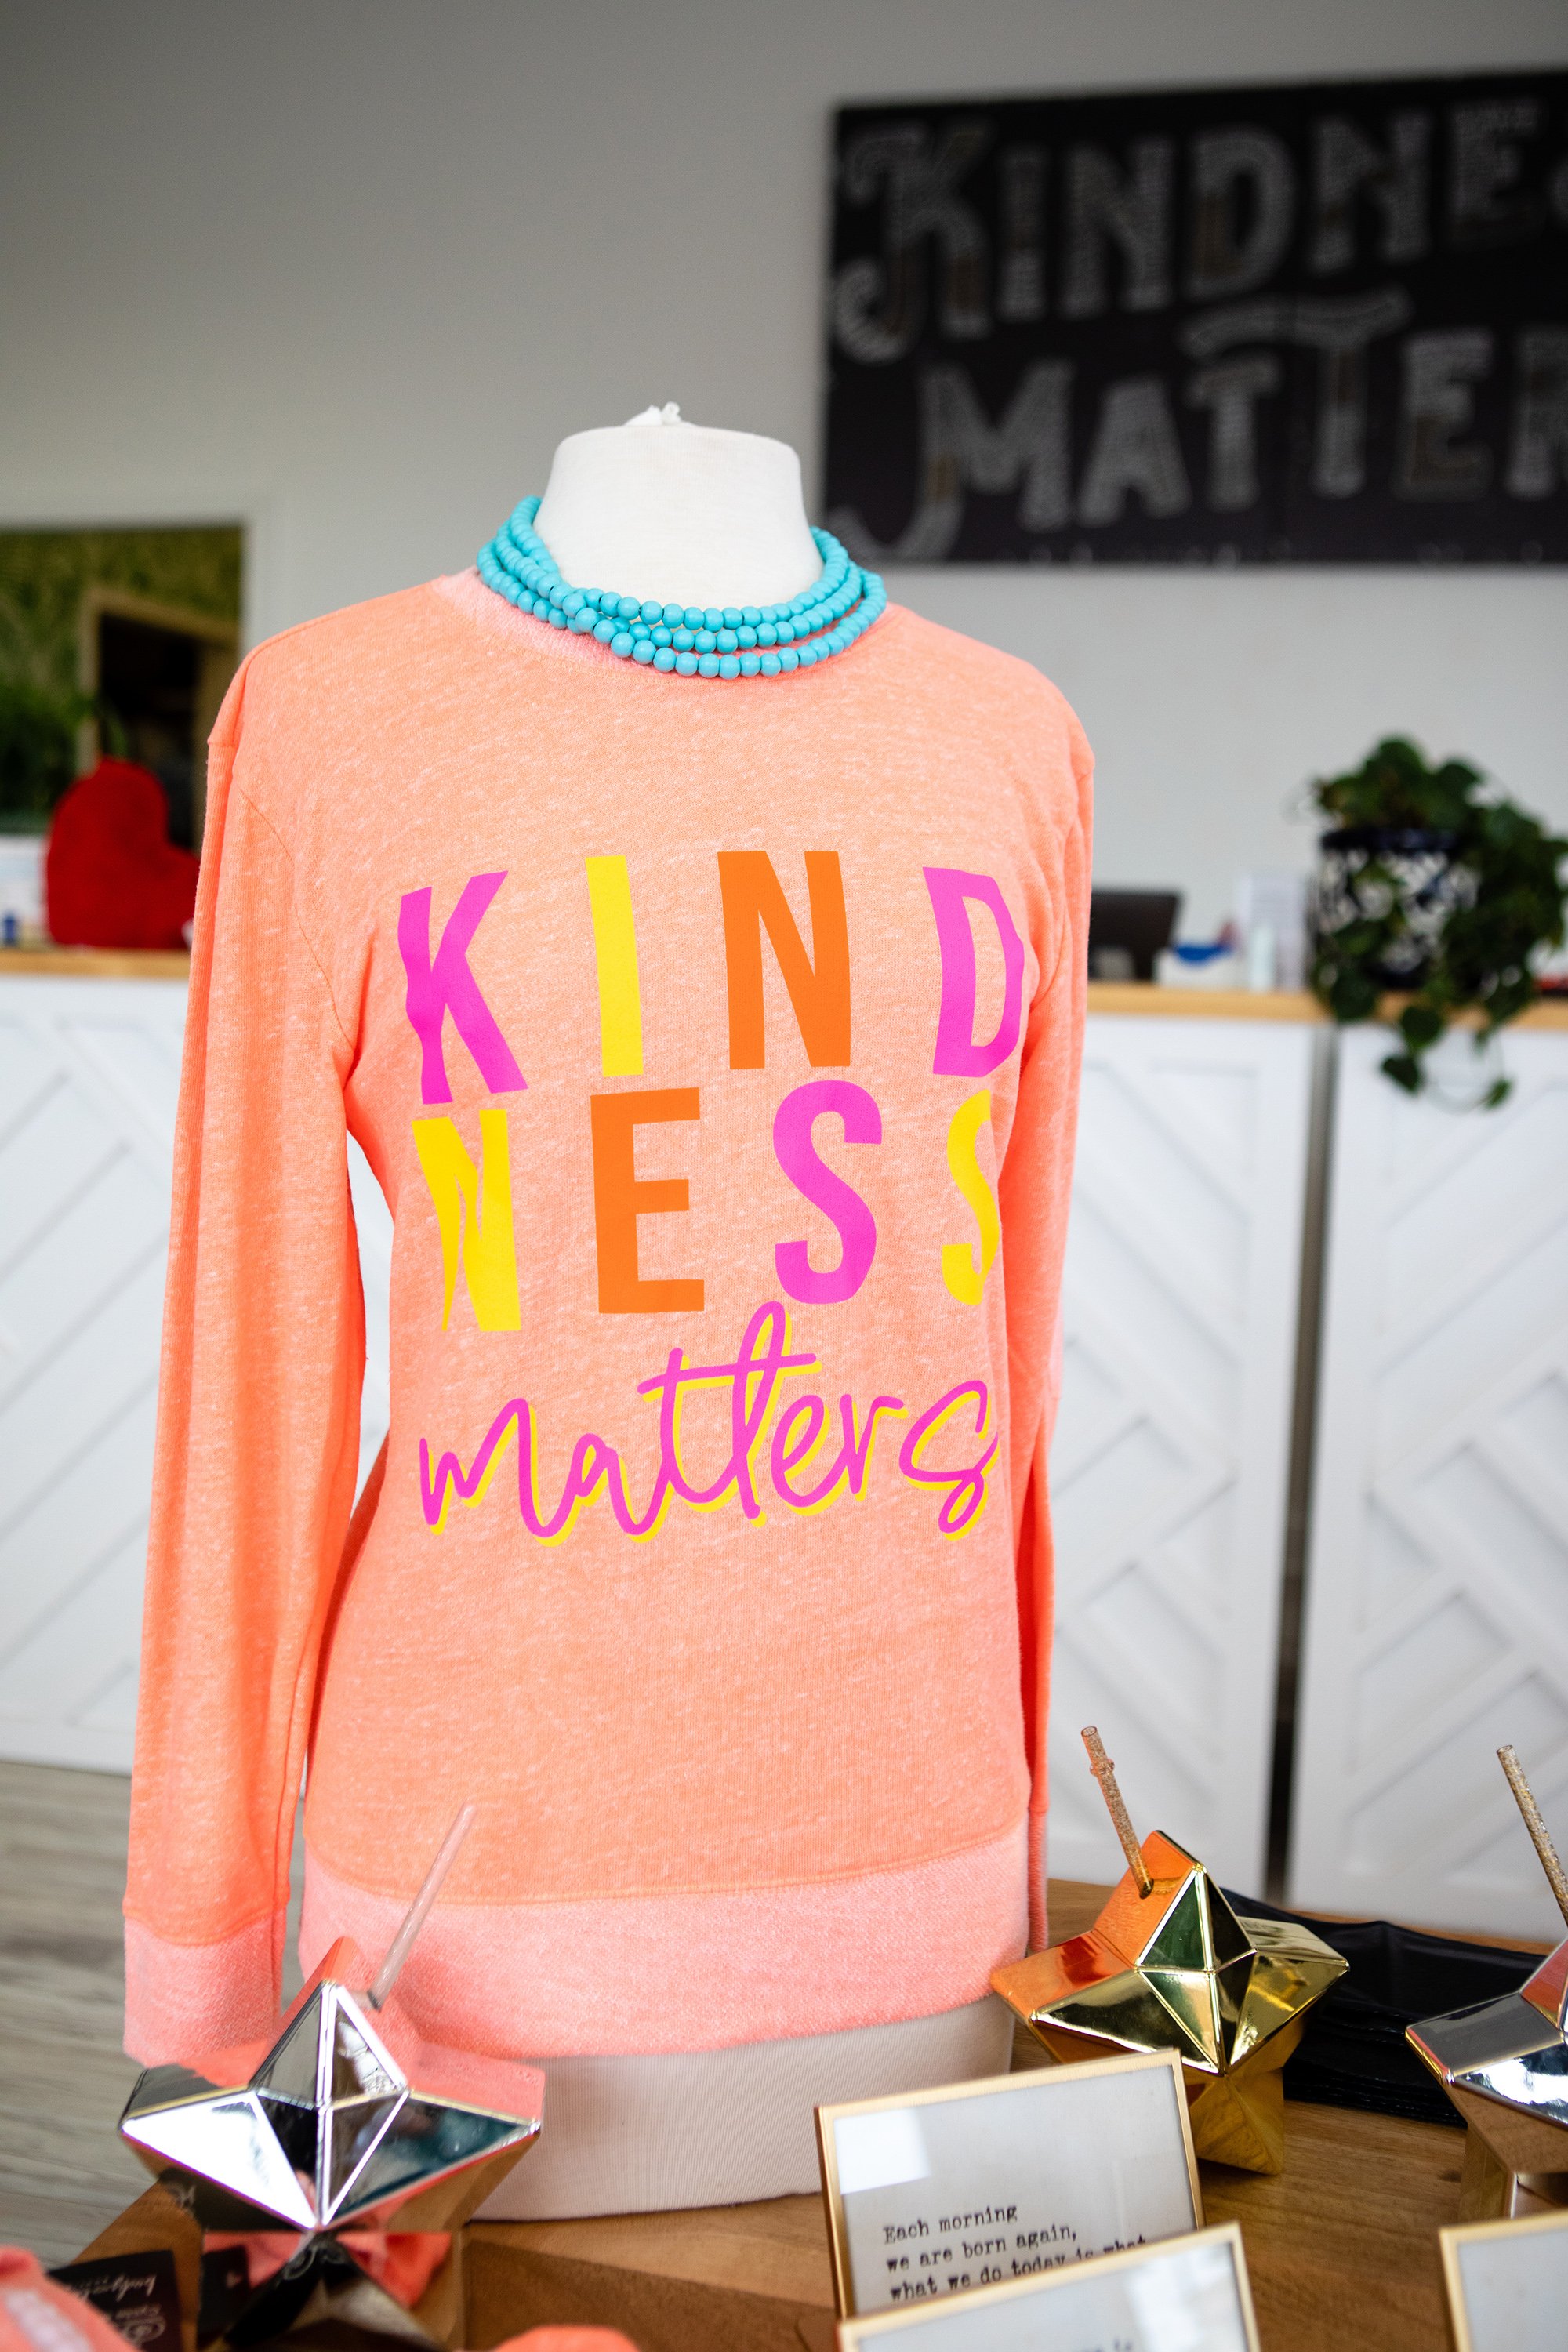  kindness matters shirt in store front setup 